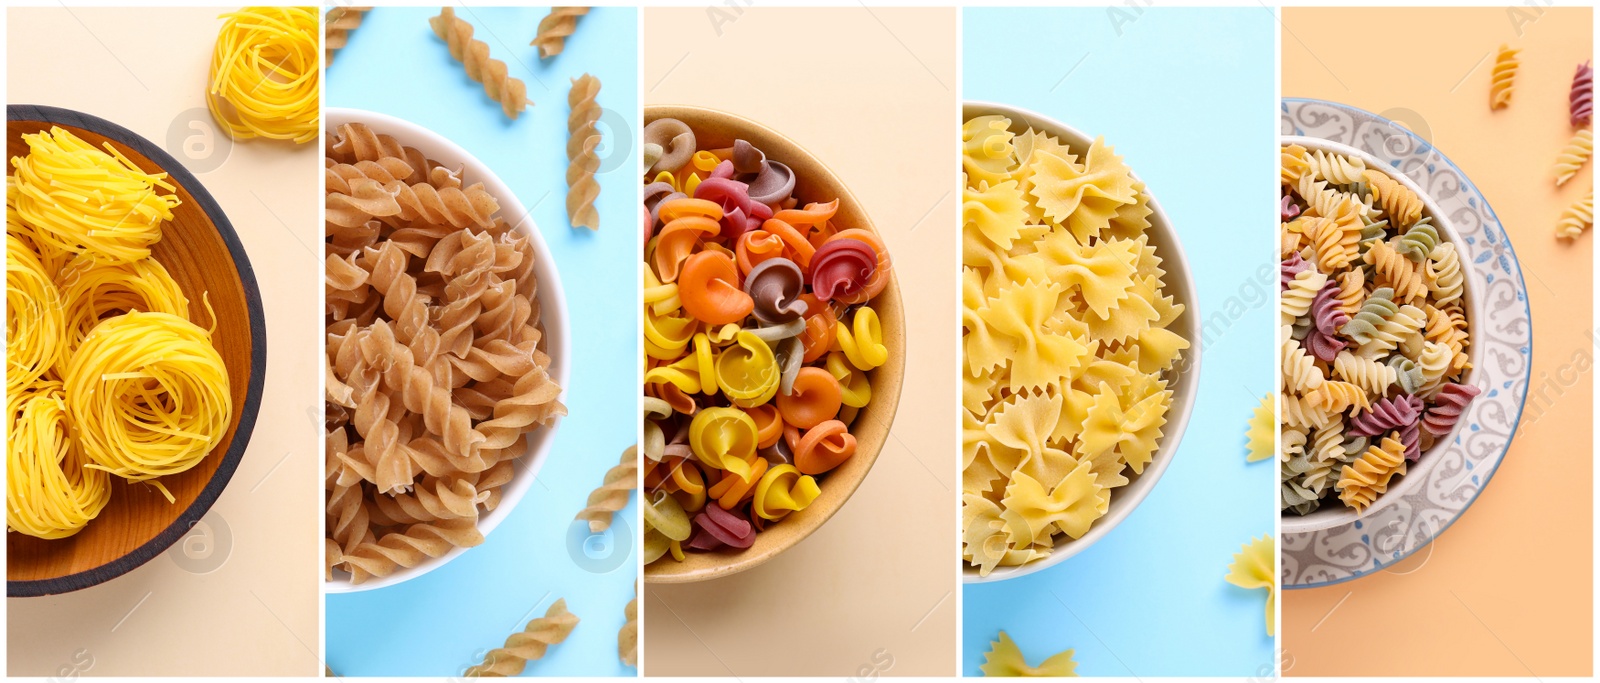 Image of Different types of uncooked pasta, top view. Photo collage